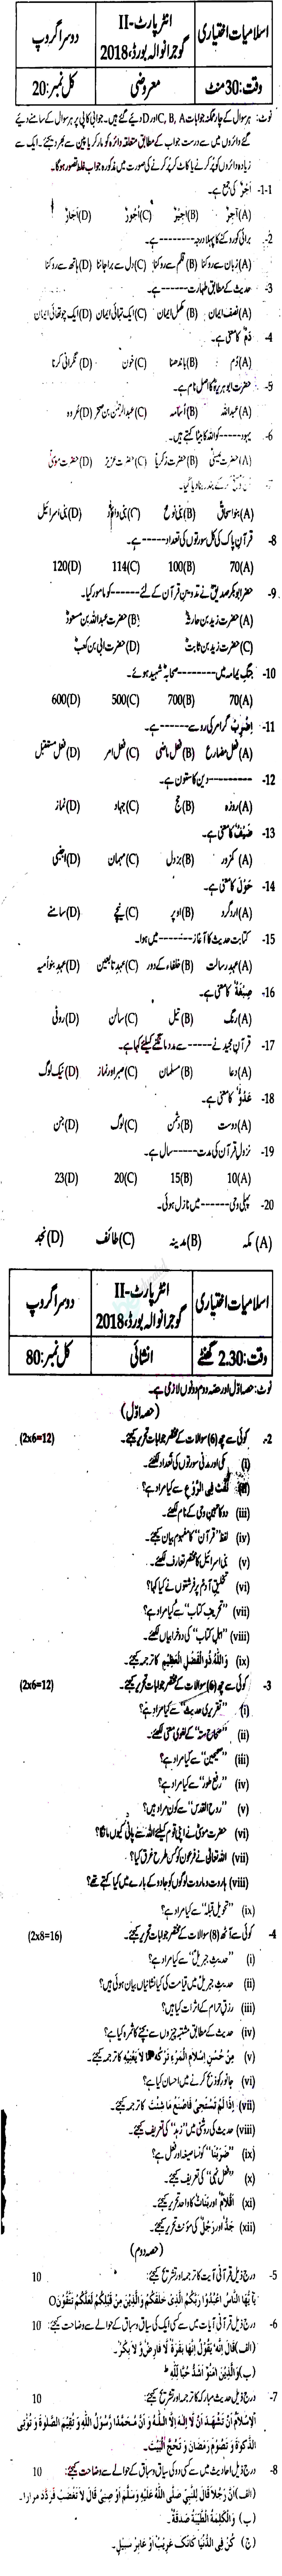 Islamiat Elective FA Part 2 Past Paper Group 2 BISE Gujranwala 2018